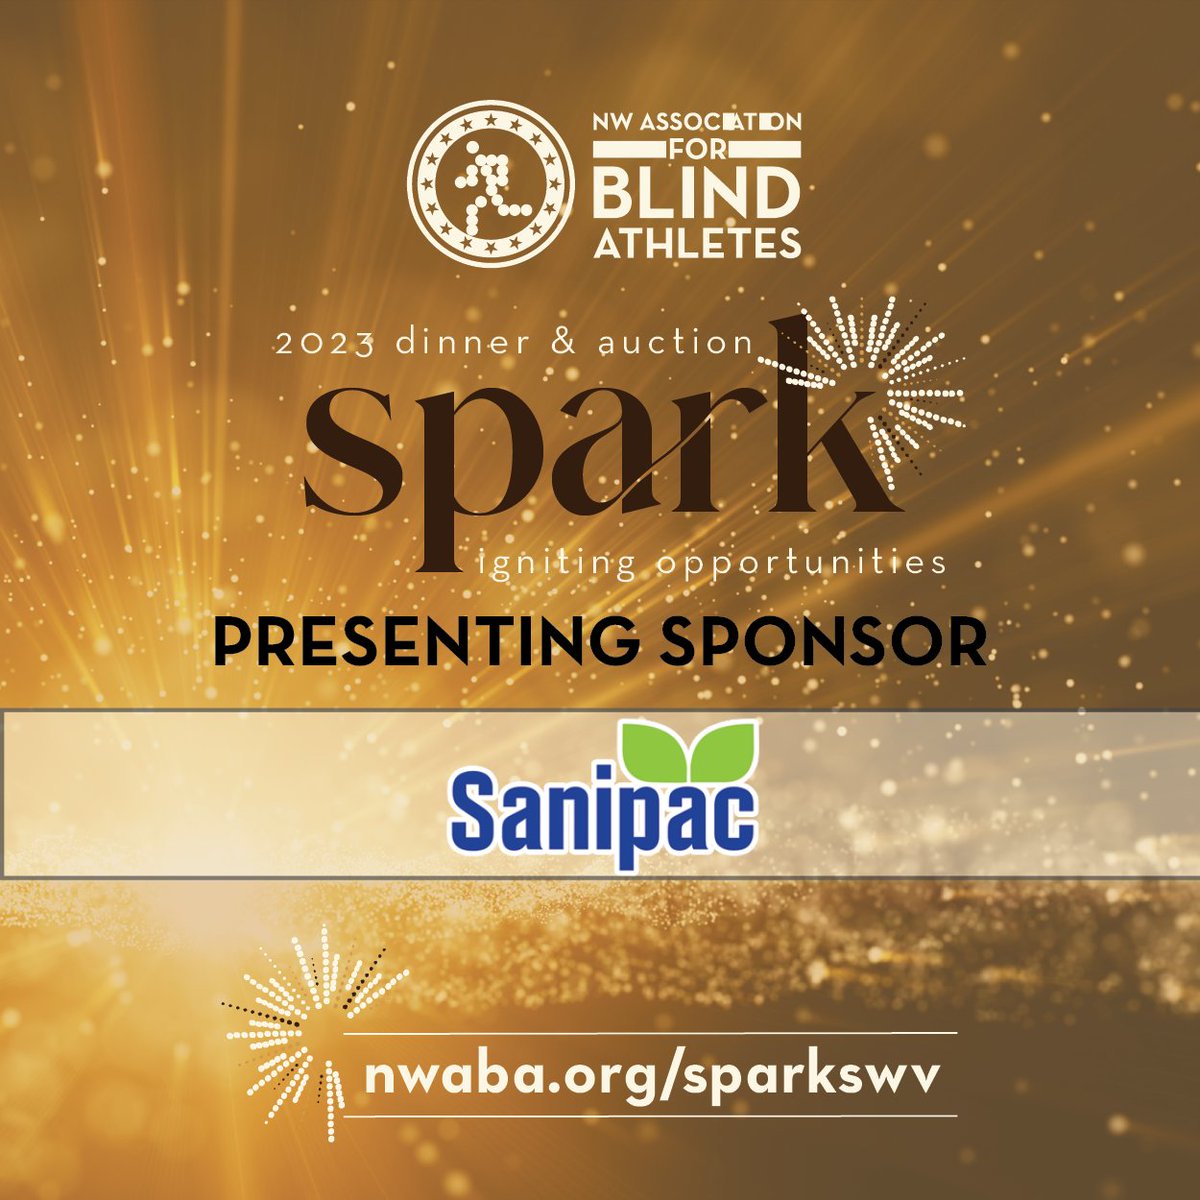 We're only one day away from SPARK dinner & auction in #Eugene! We are so thankful for our #presentingsponsor—Sanipac—who supports our mission and ignites the spark for individuals who are blind & visually impaired. #nwaba #blindathletes